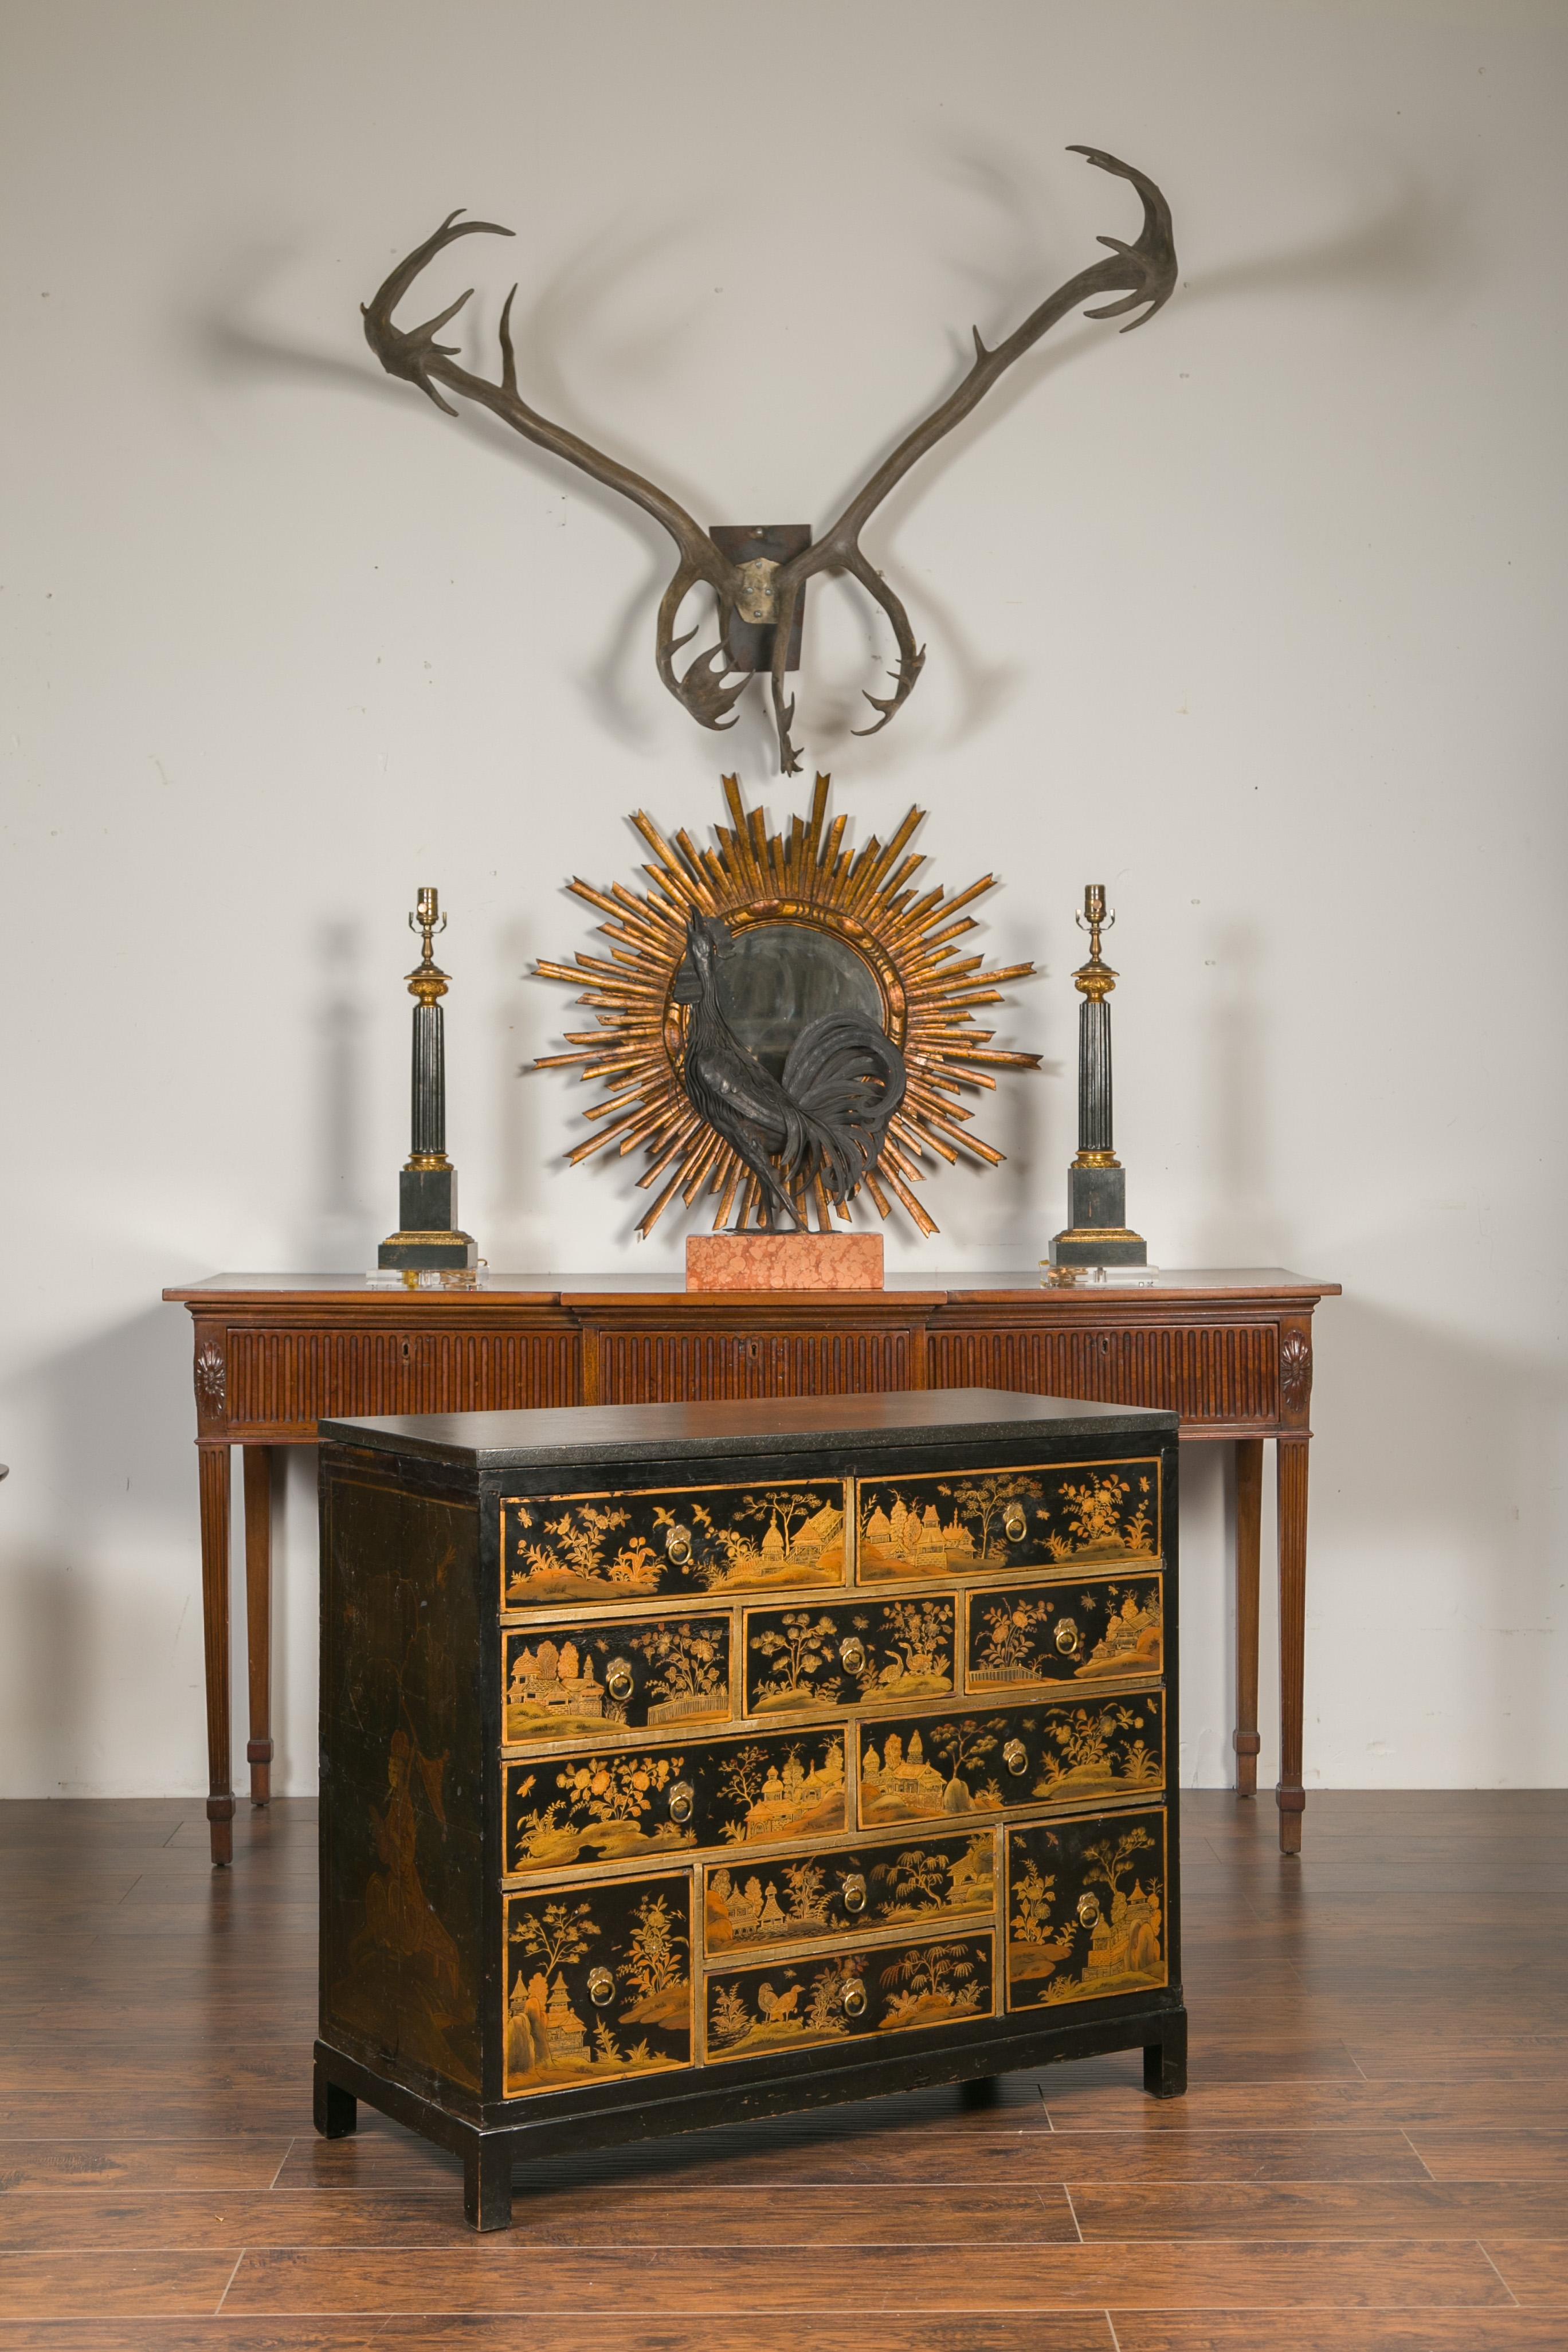 An English Georgian ebonized chinoiserie chest-of-drawers from the early 19th century with gilt and black lacquered accents and later added stone top. Created in England during the first quarter of the 19th century, this chest attracts our immediate